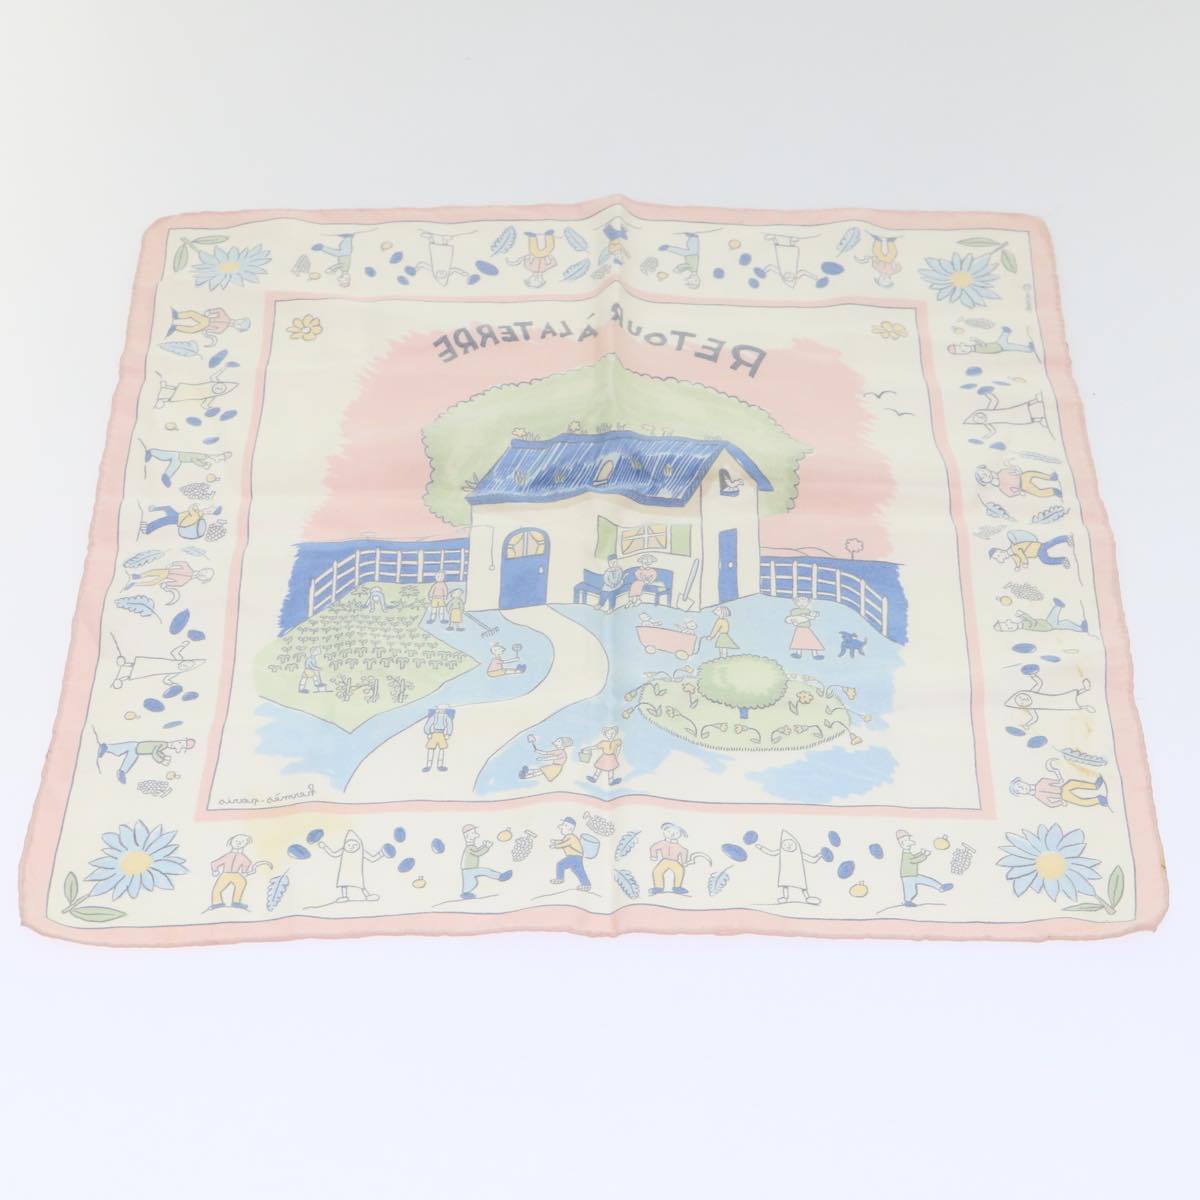 HERMES Carre 40 Scarf Silk 2Set Pink Blue Auth bs8244